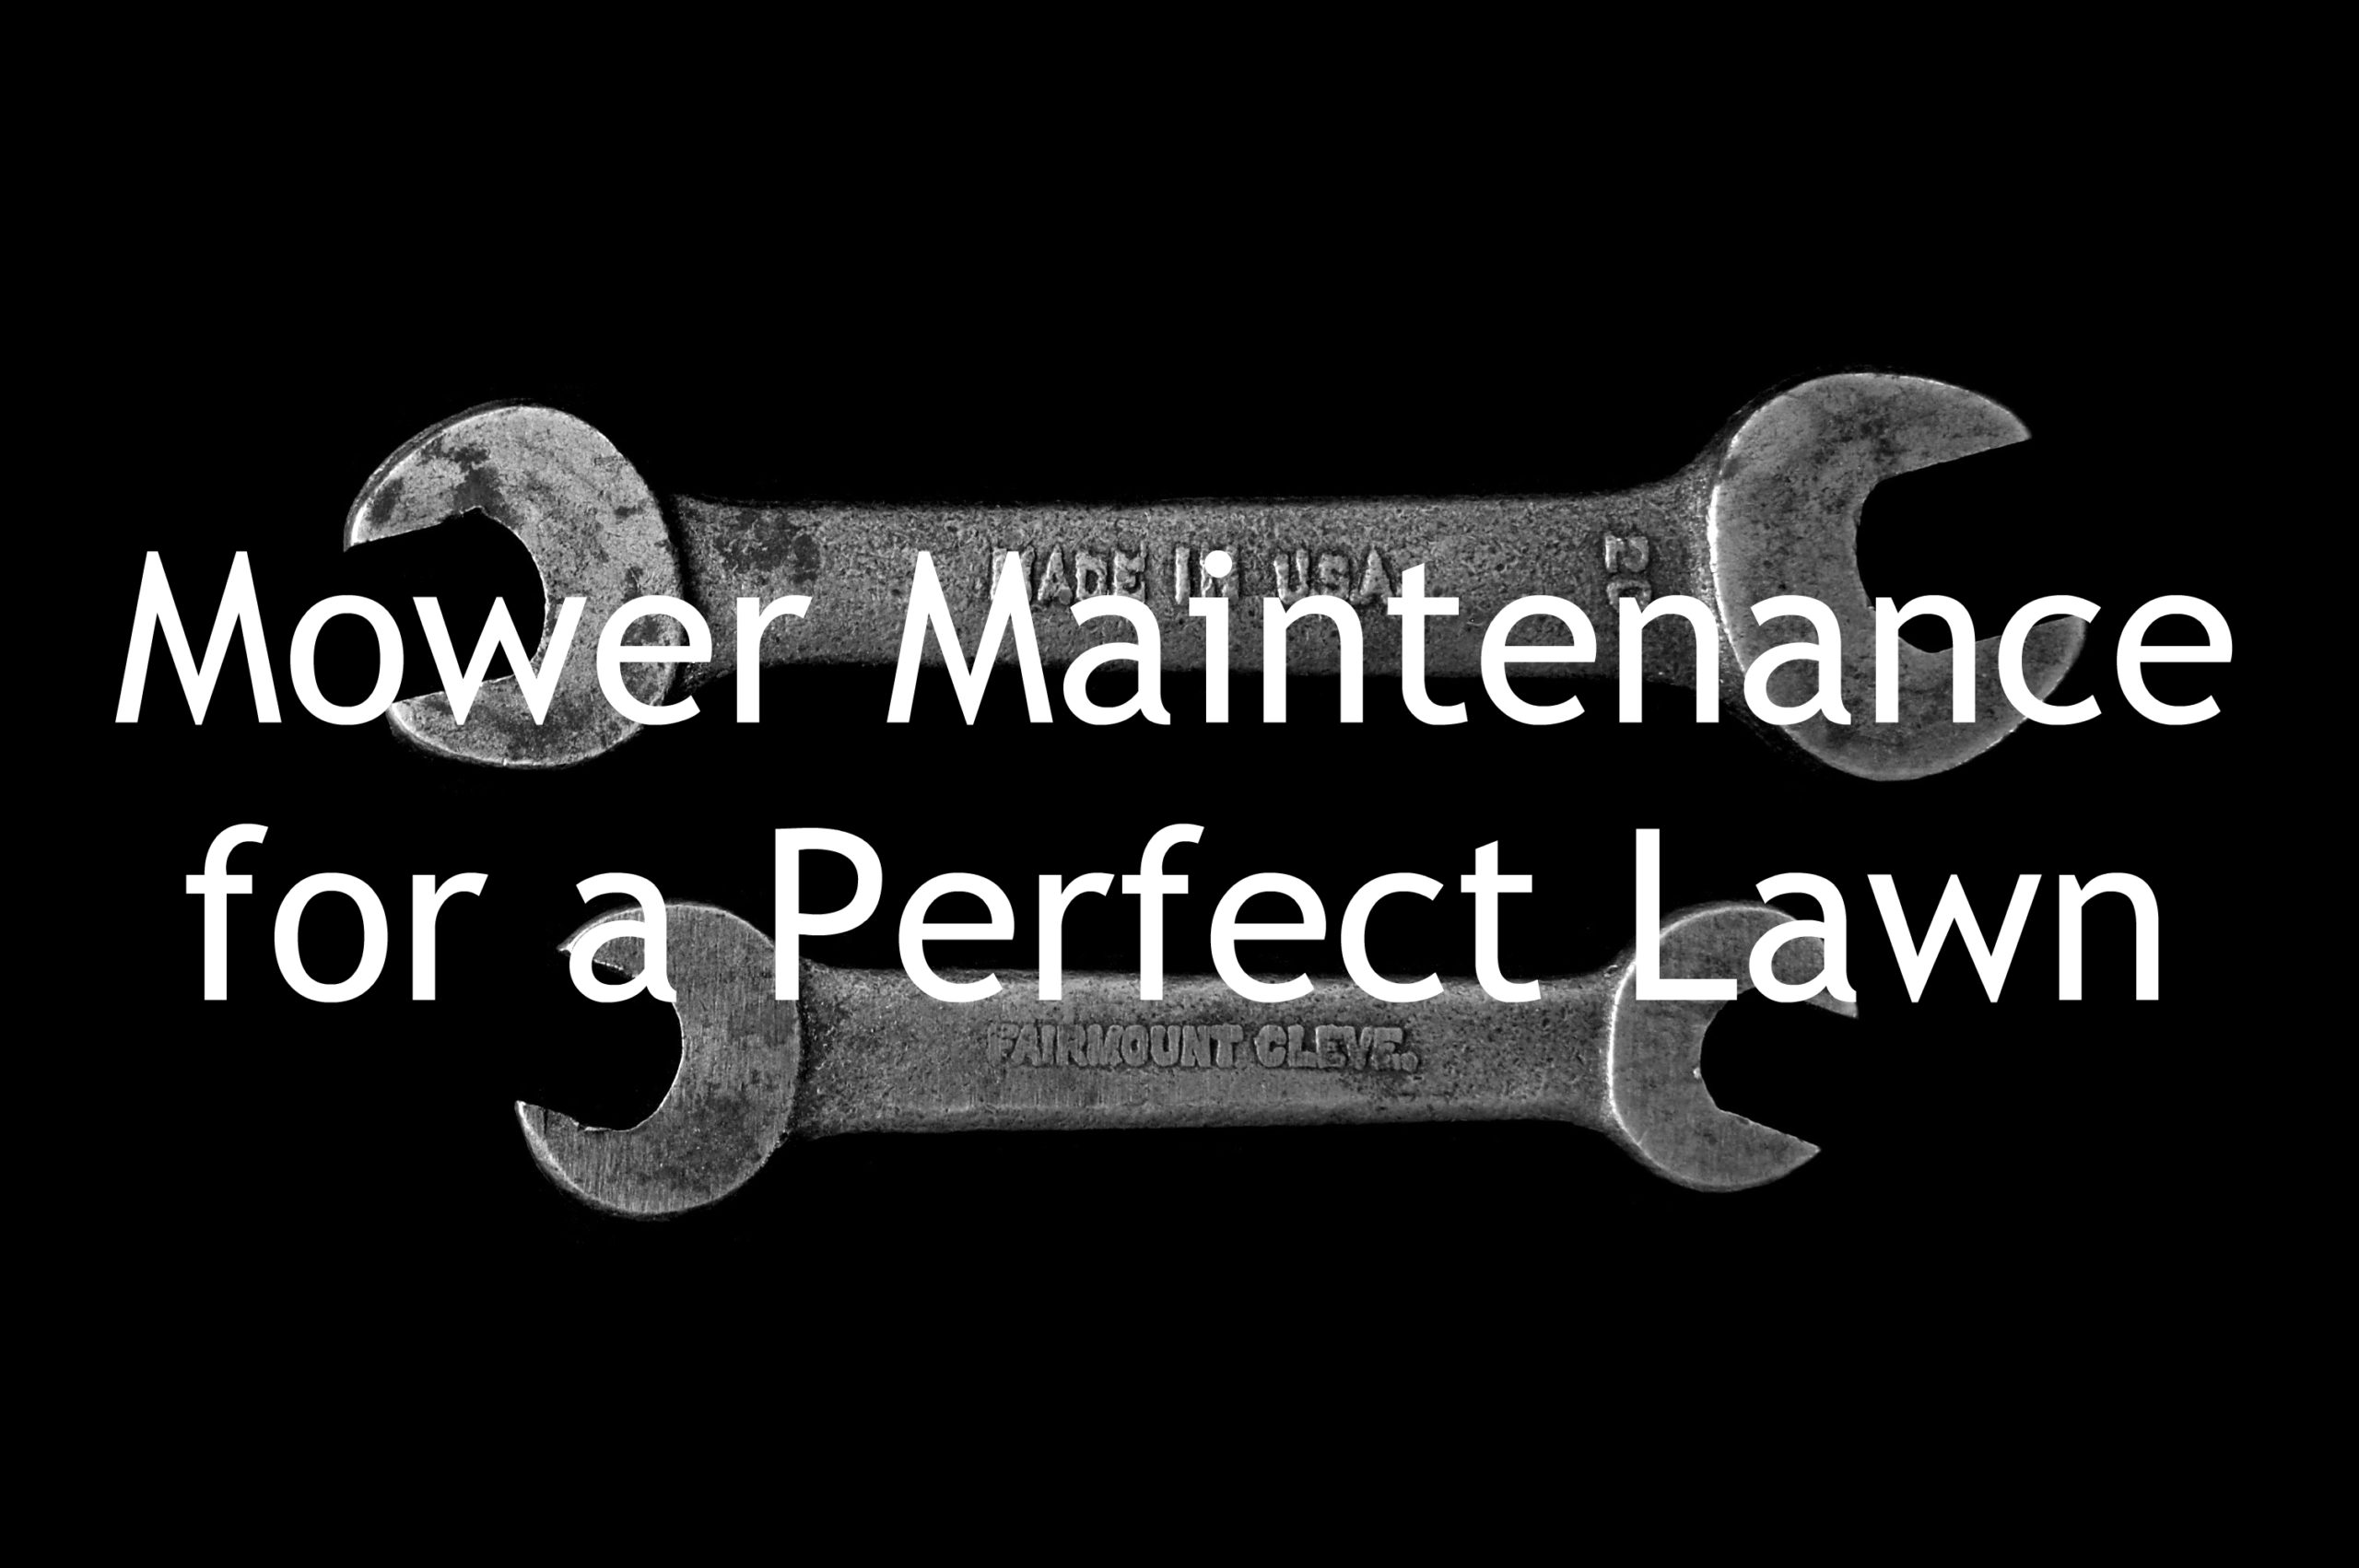 Mower Maintenance for a Perfect Lawn scaled - Mower Maintenance for a Perfect Lawn